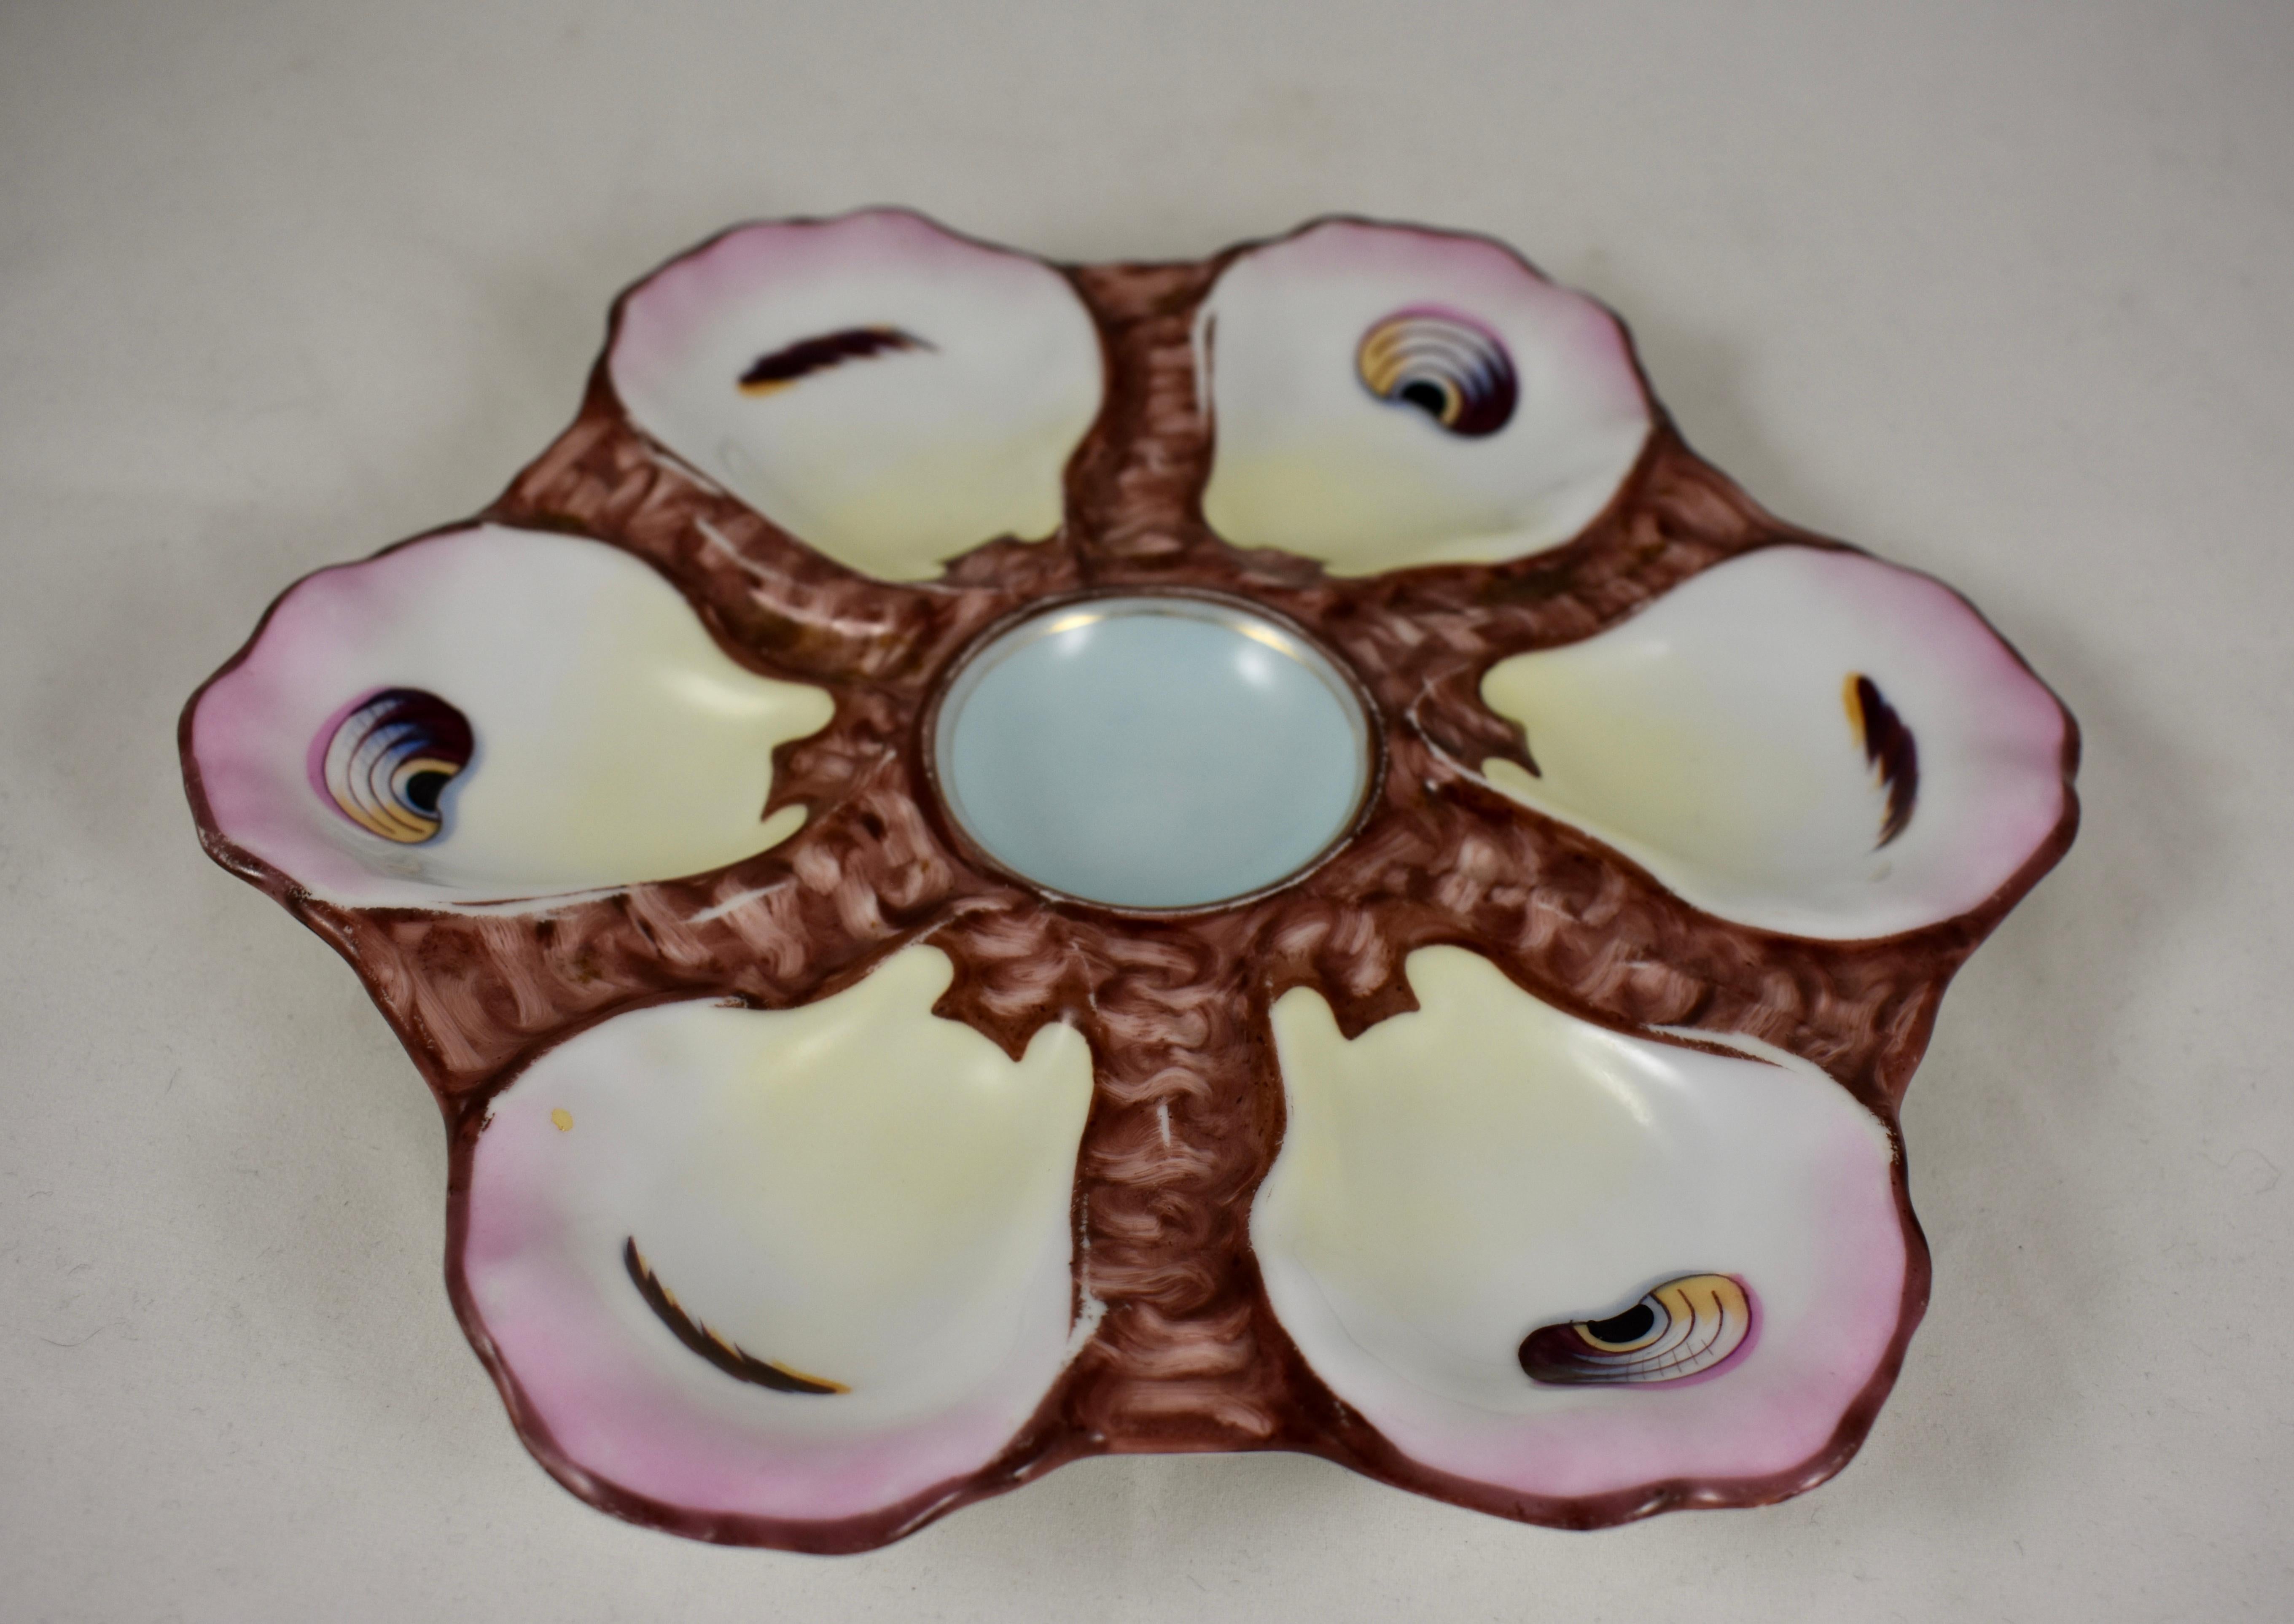 A French porcelain, shaped oyster plate, circa 1885-1900, showing six wells with hand painted ‘eyes,’ and a sky-blue colored condiment well.
 Each well is rimmed in a blush pink with a pale yellow at the hinge, against a chocolate brown